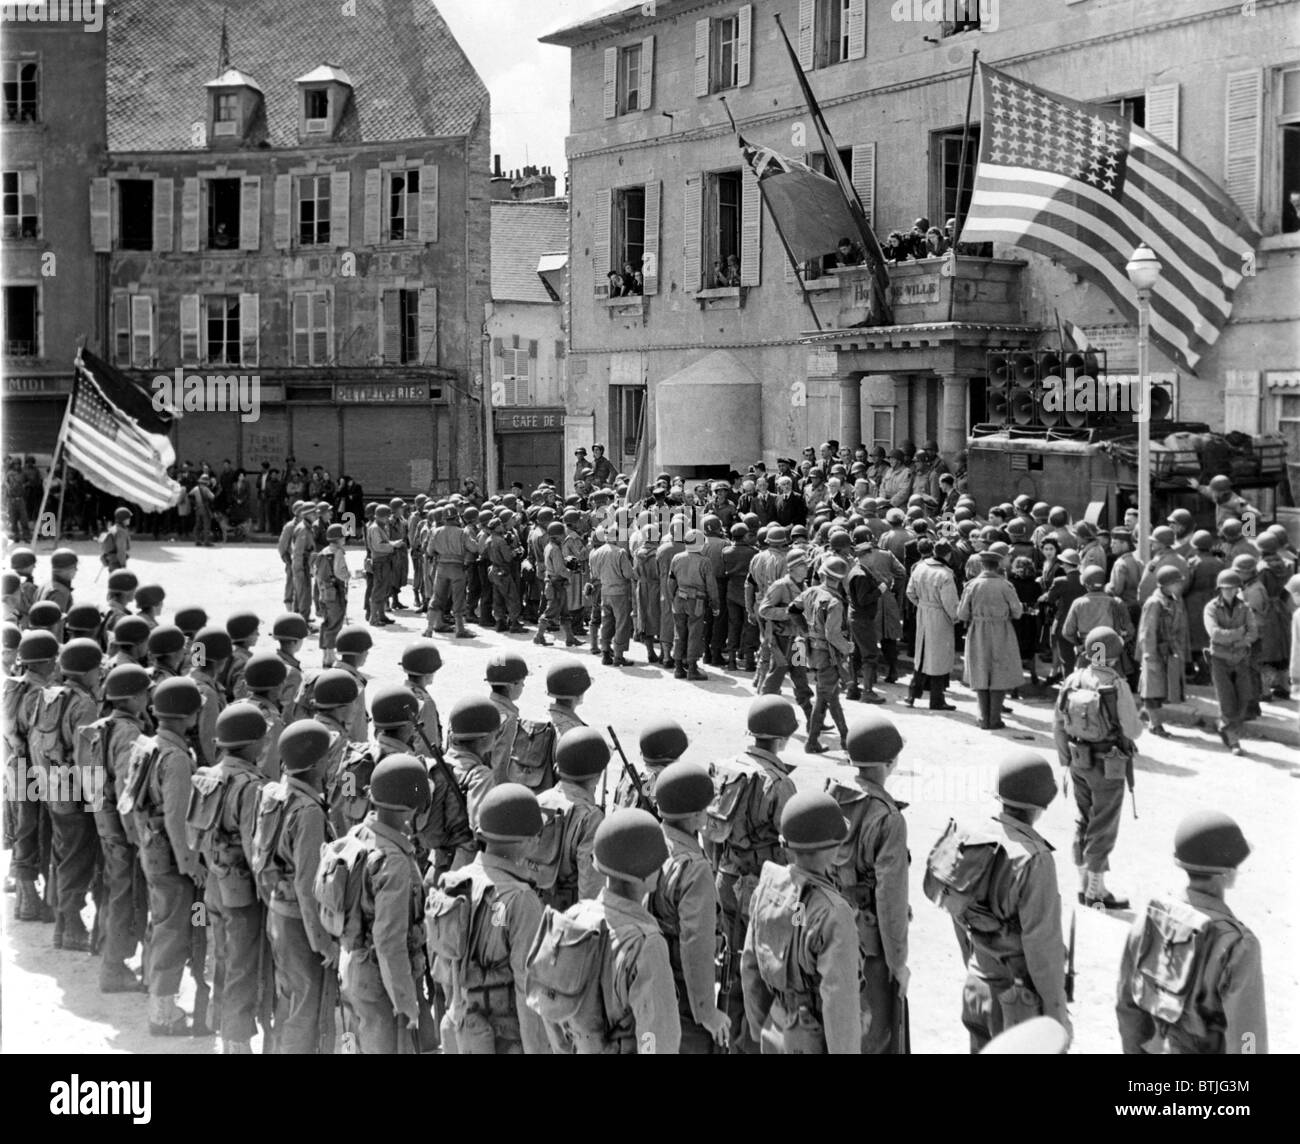 WORLD WAR II, Cherbourg flies under Franch, British and American flags as control of the newly liberated village is returned to Stock Photo